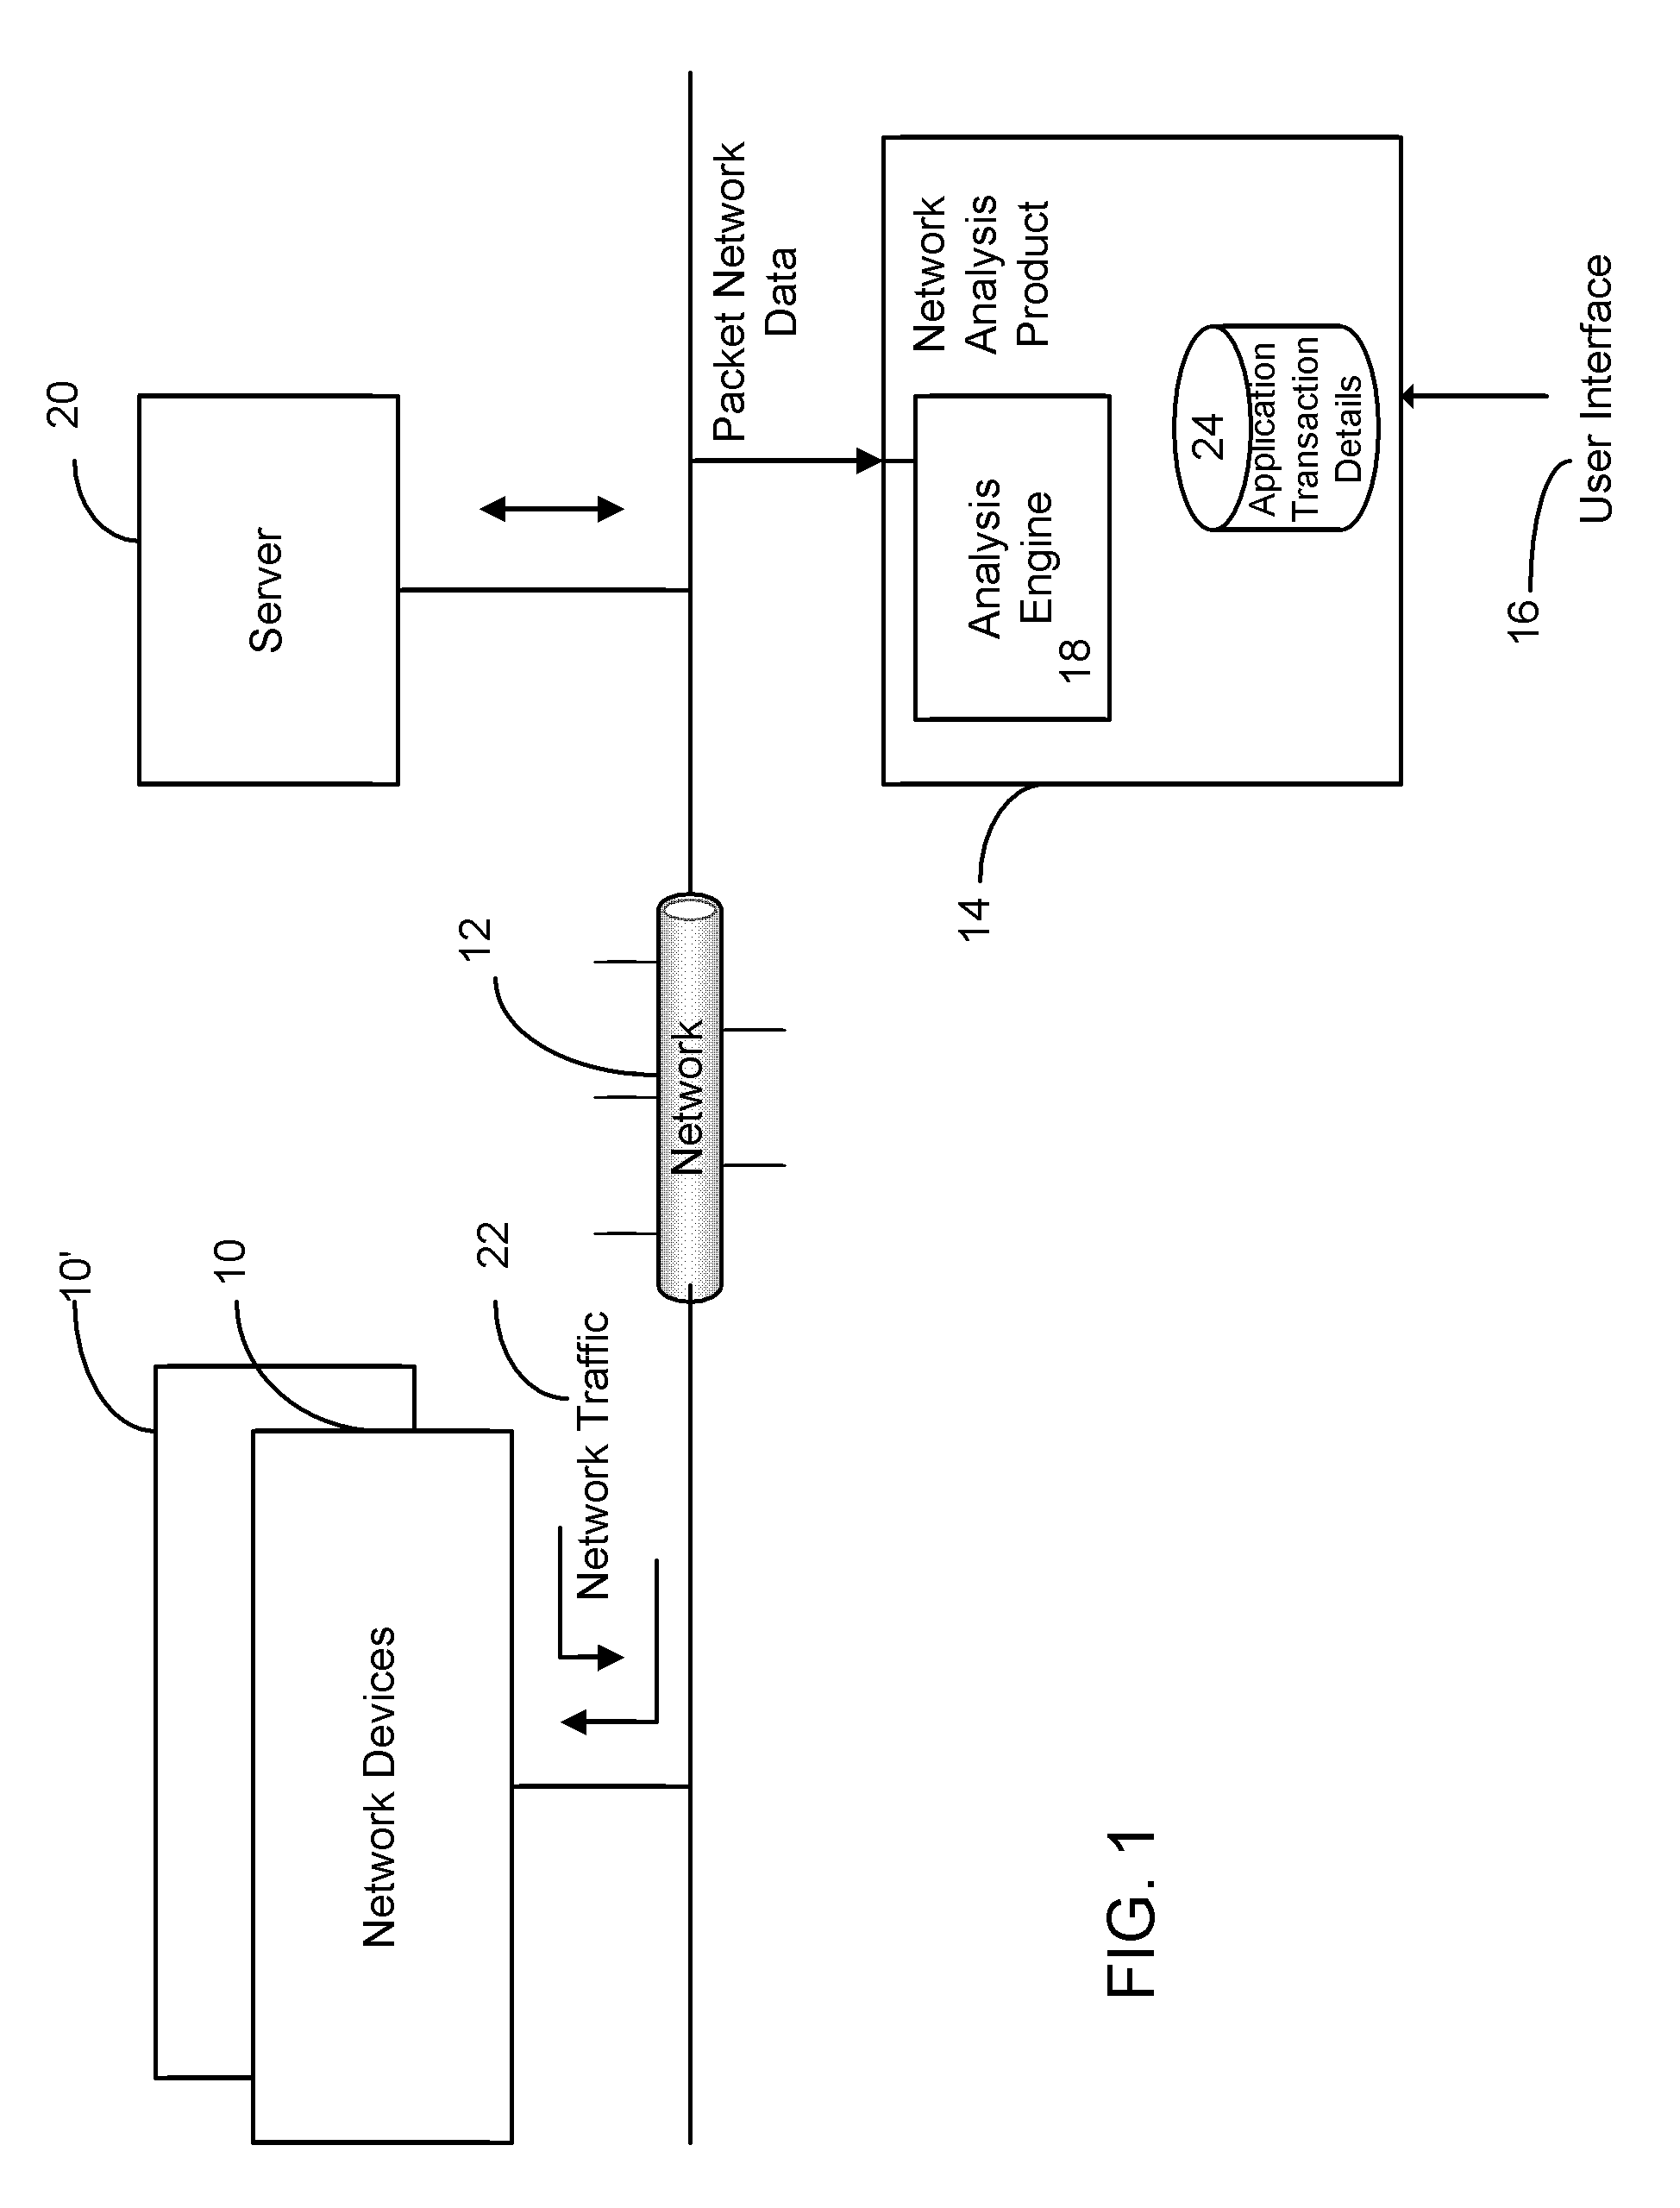 Method and apparatus for the efficient correlation of network traffic to related packets